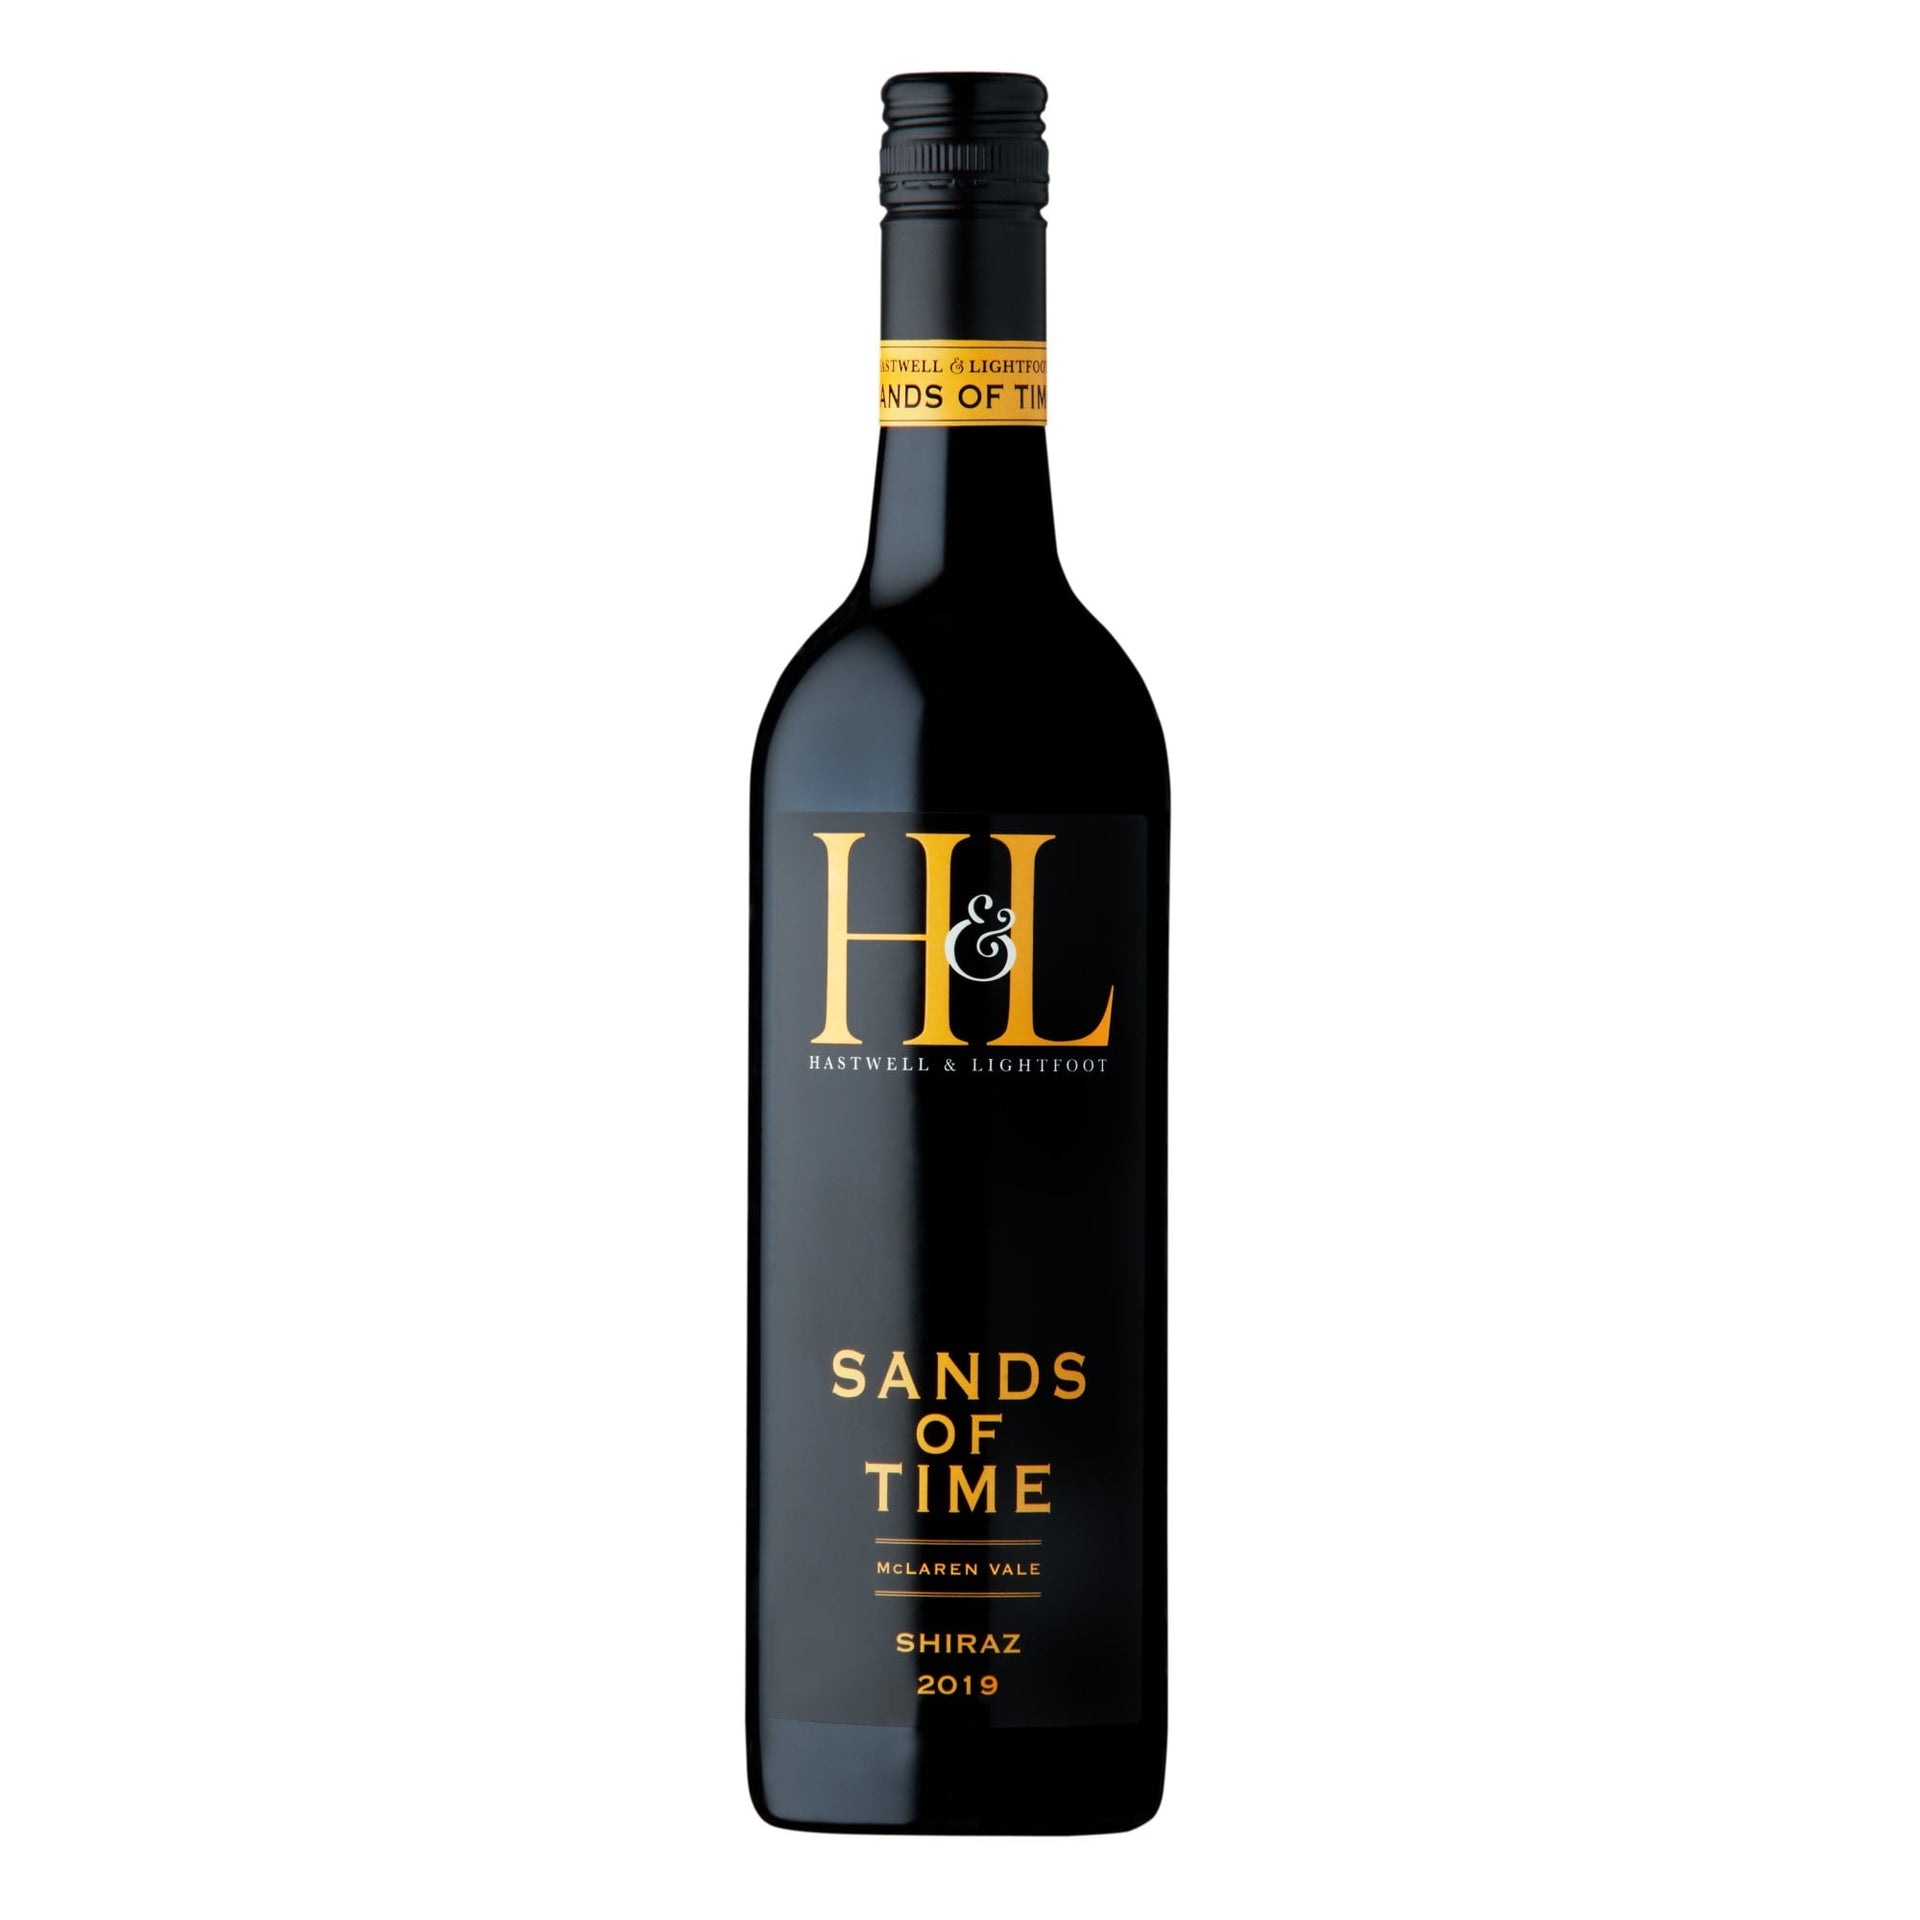 Wine of Shiraz – Hastwell Time & Lightfoot 2019 | Sands